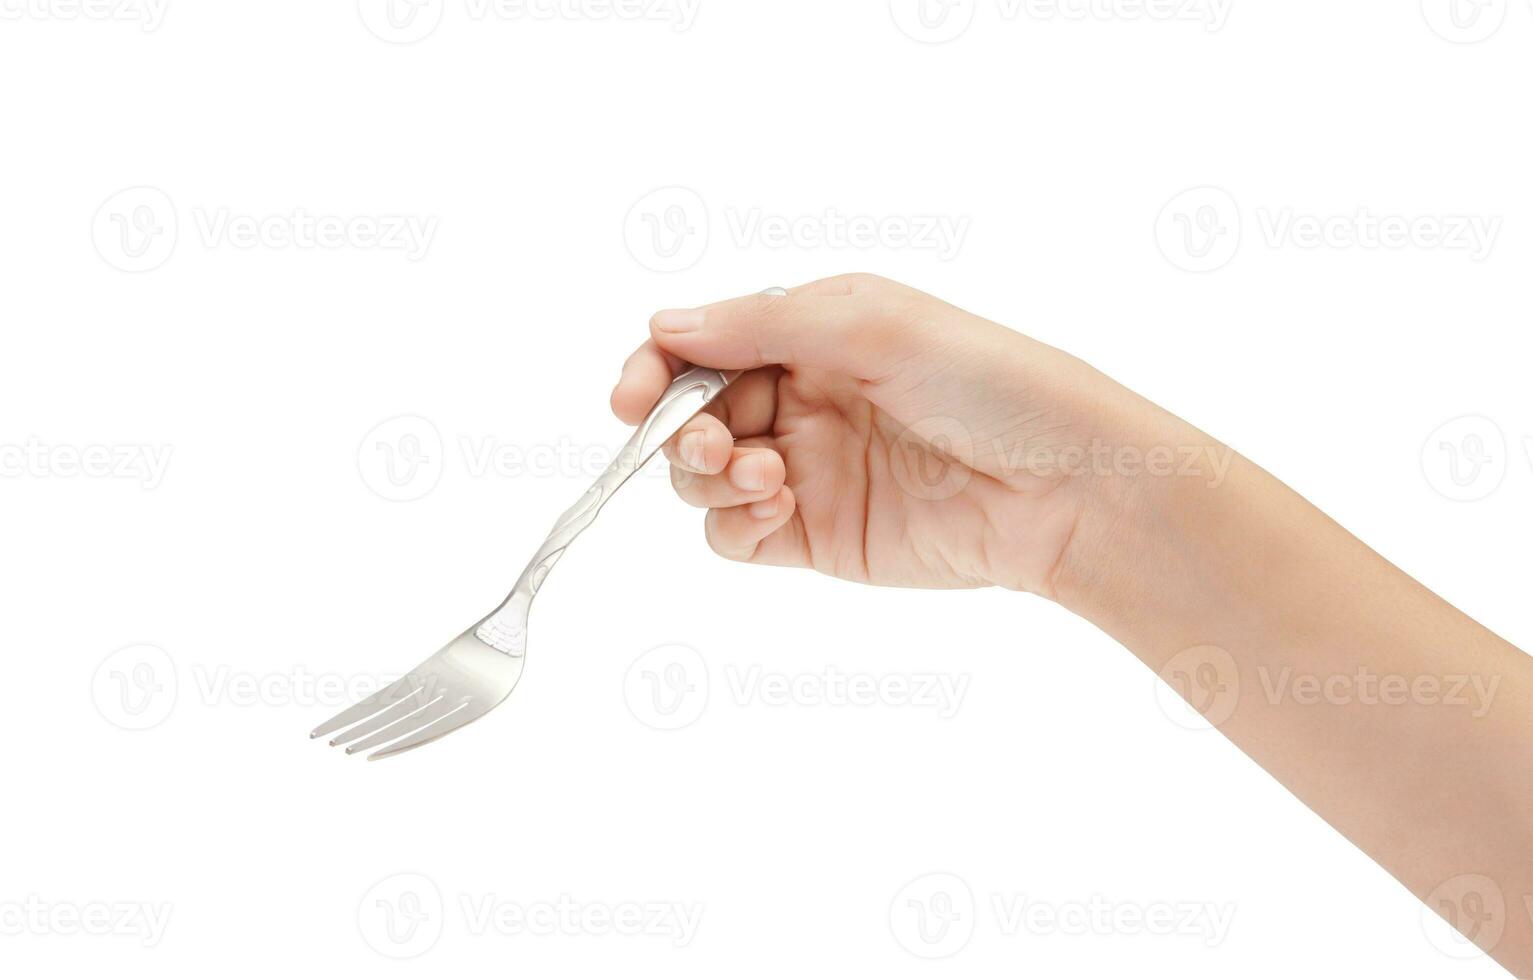 Female Hand Holding A Silver Stainless Fork Closeup Photo Isolated On White Background